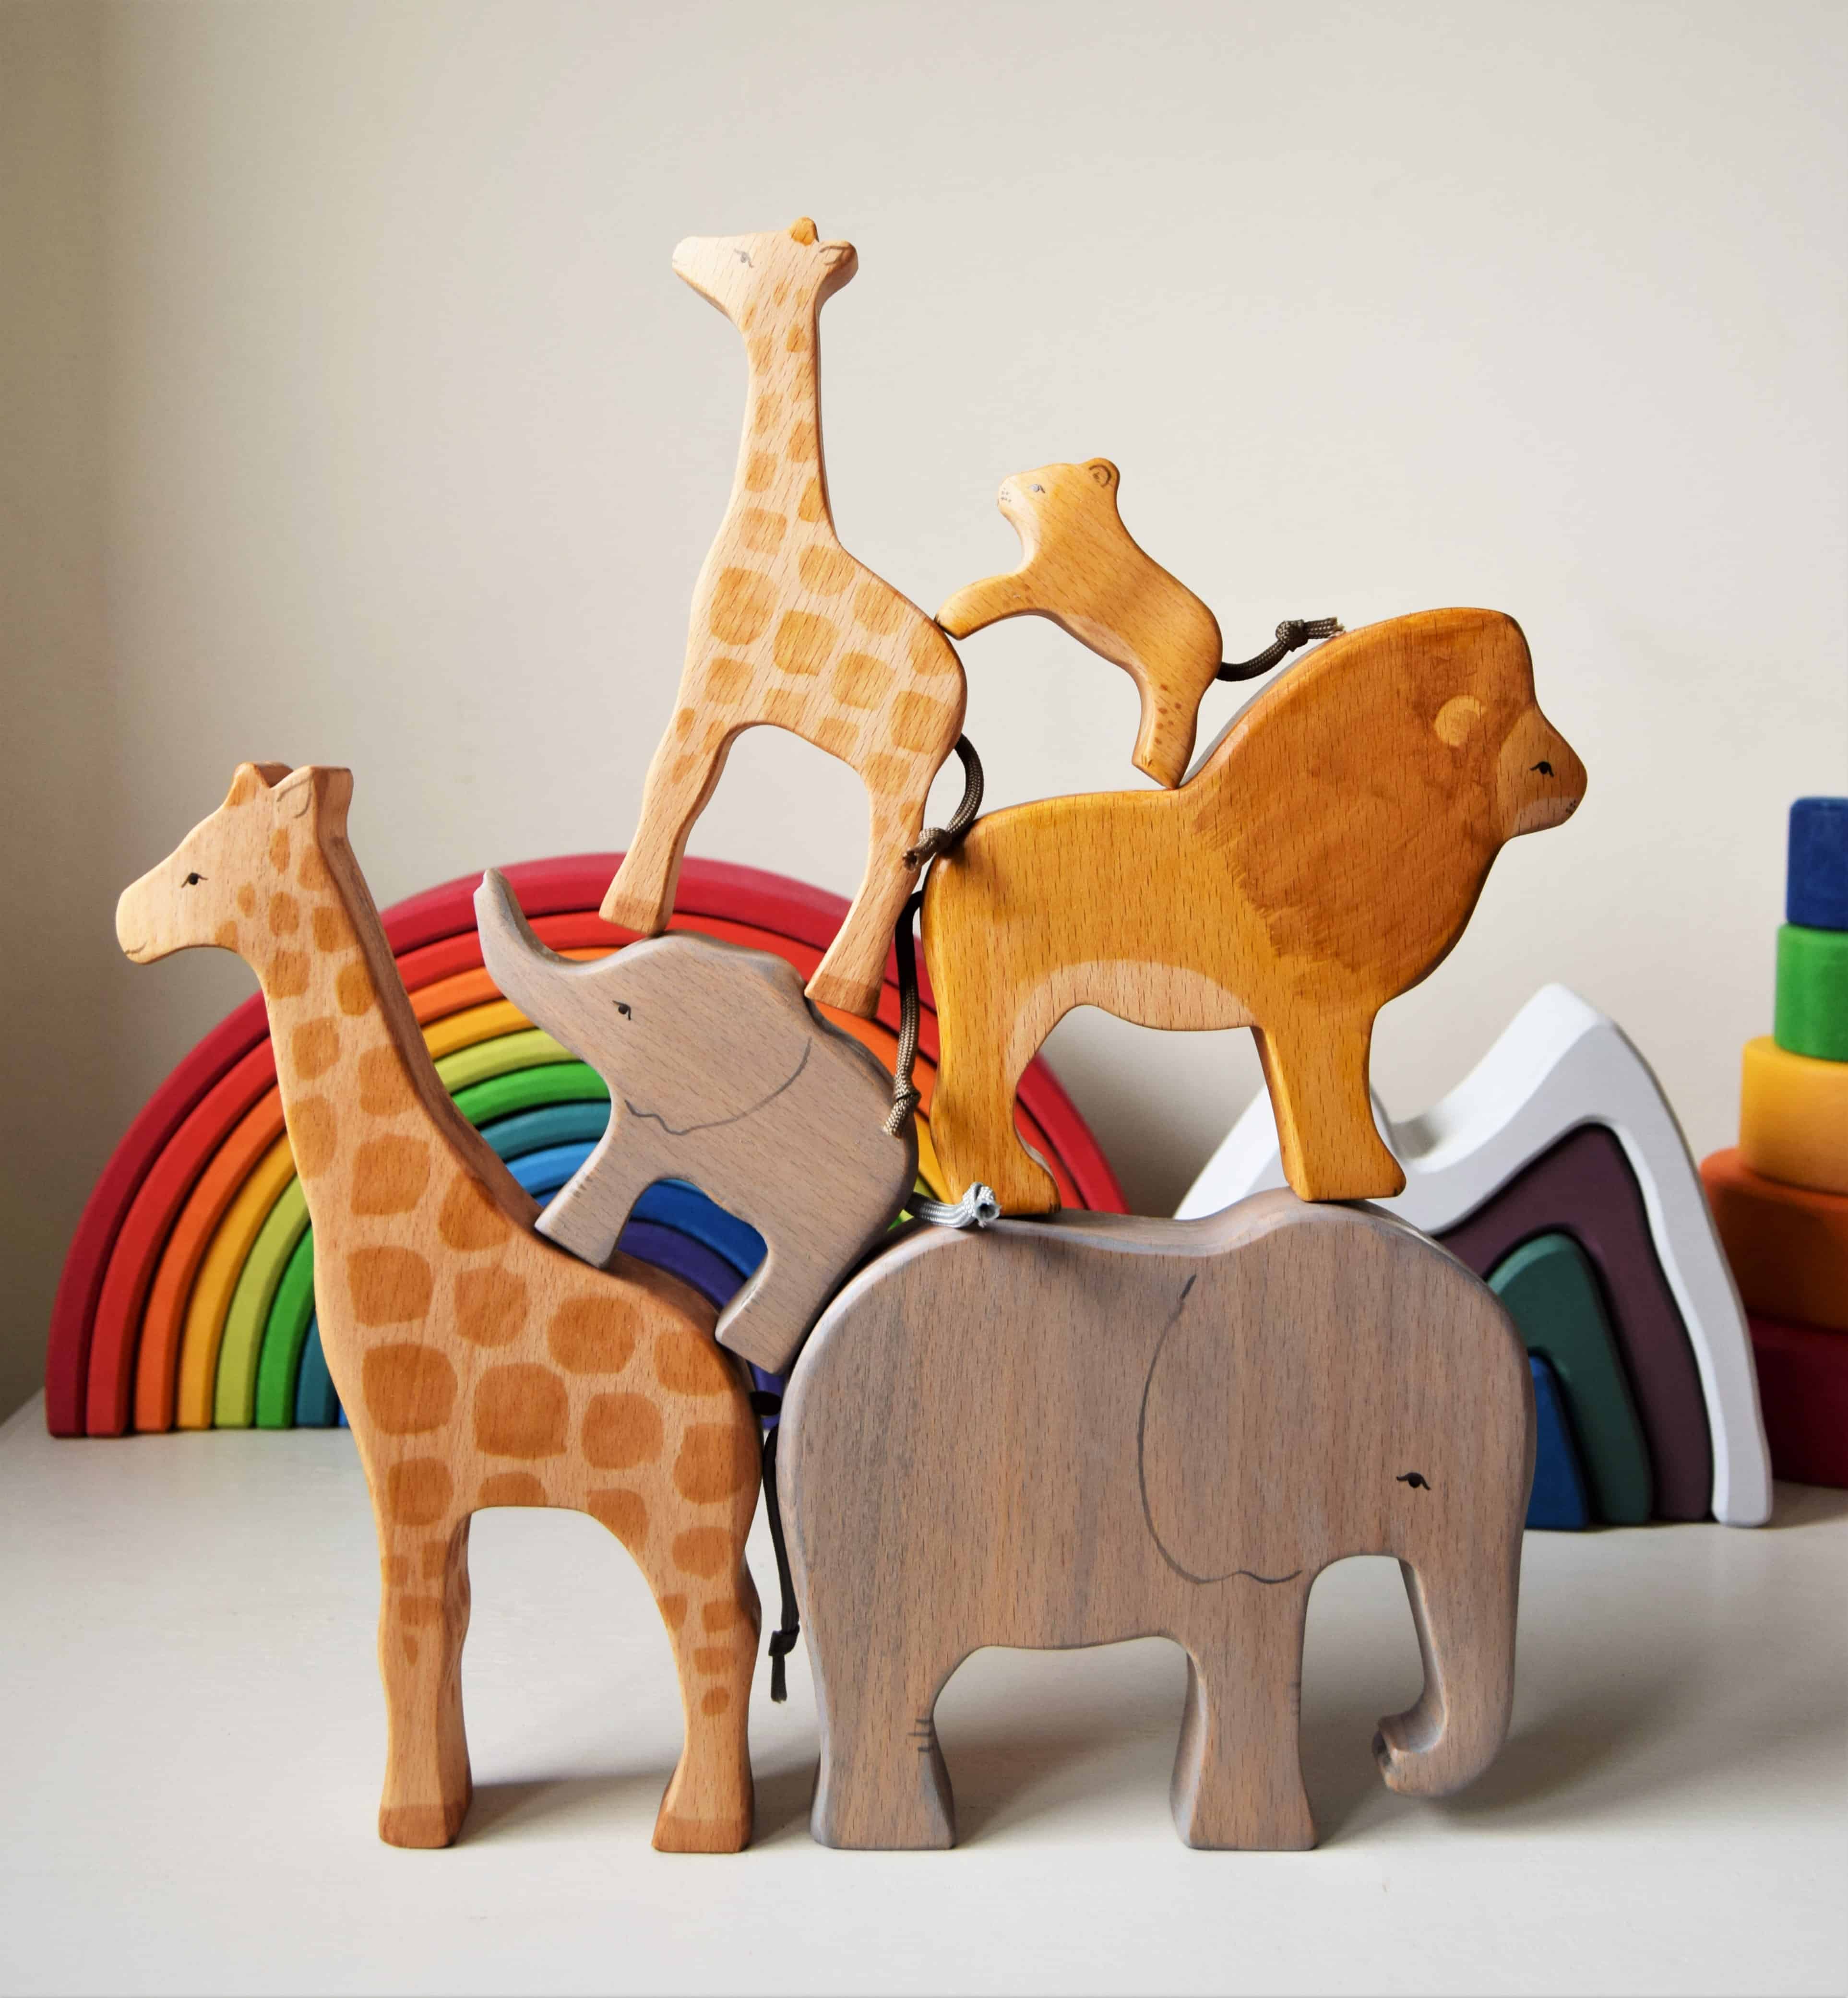 meet the mum behind the maker - busy busy learning - eric and albert's crafts - handmade - handcrafted - UK made - wooden toys - wooden animals